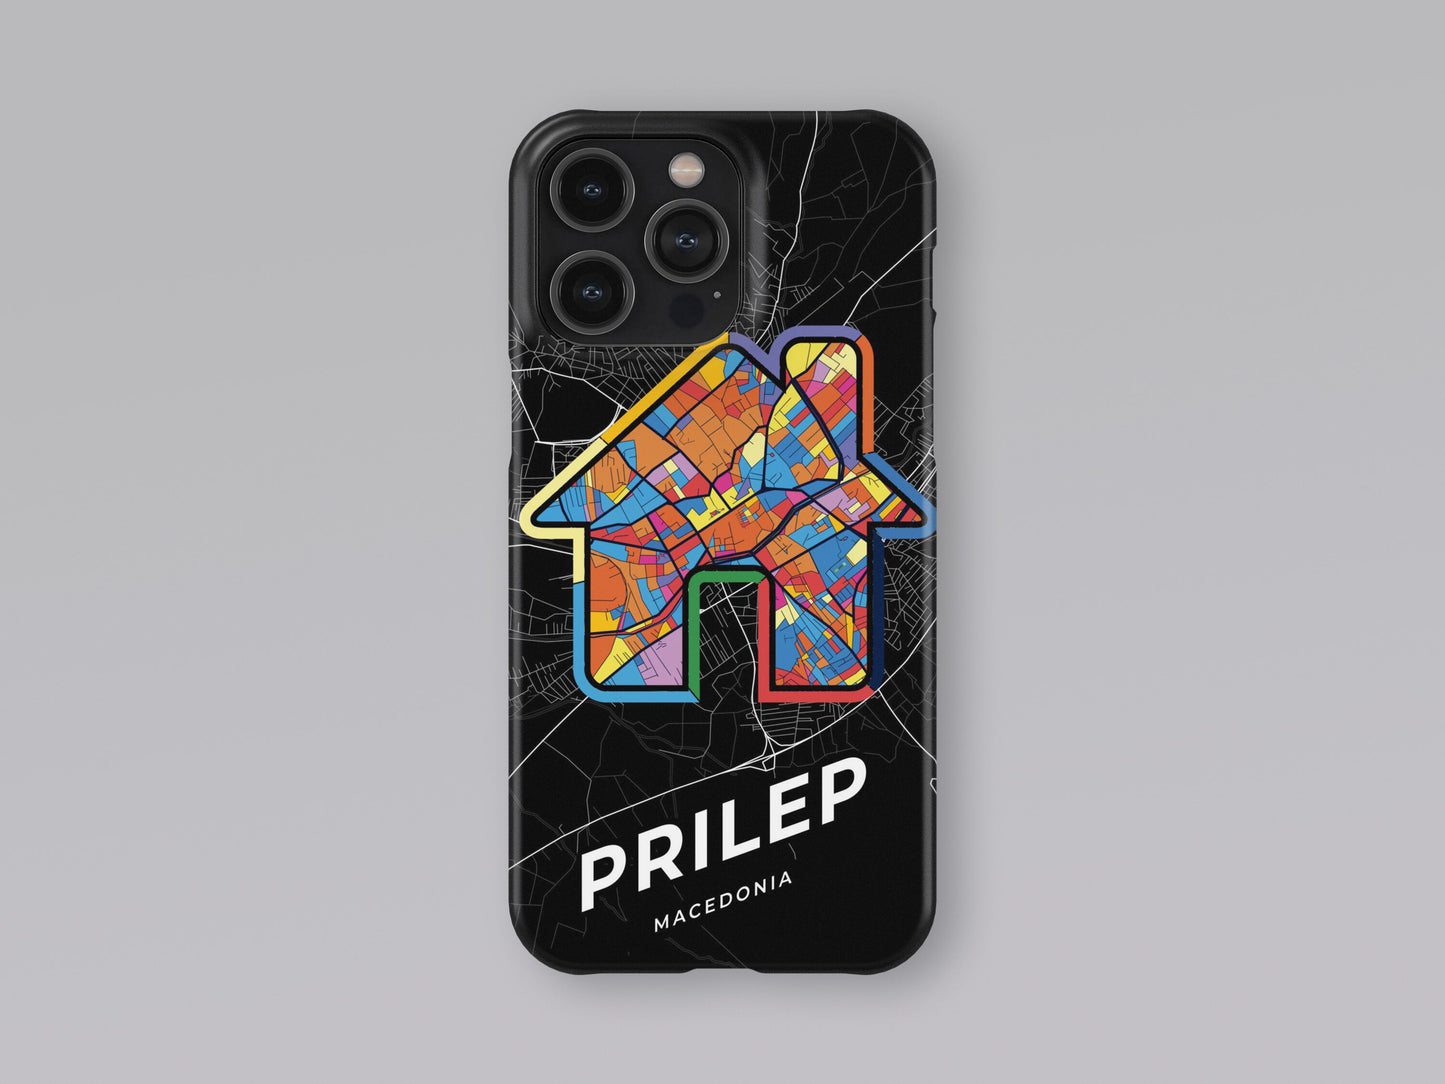 Prilep North Macedonia slim phone case with colorful icon. Birthday, wedding or housewarming gift. Couple match cases. 3